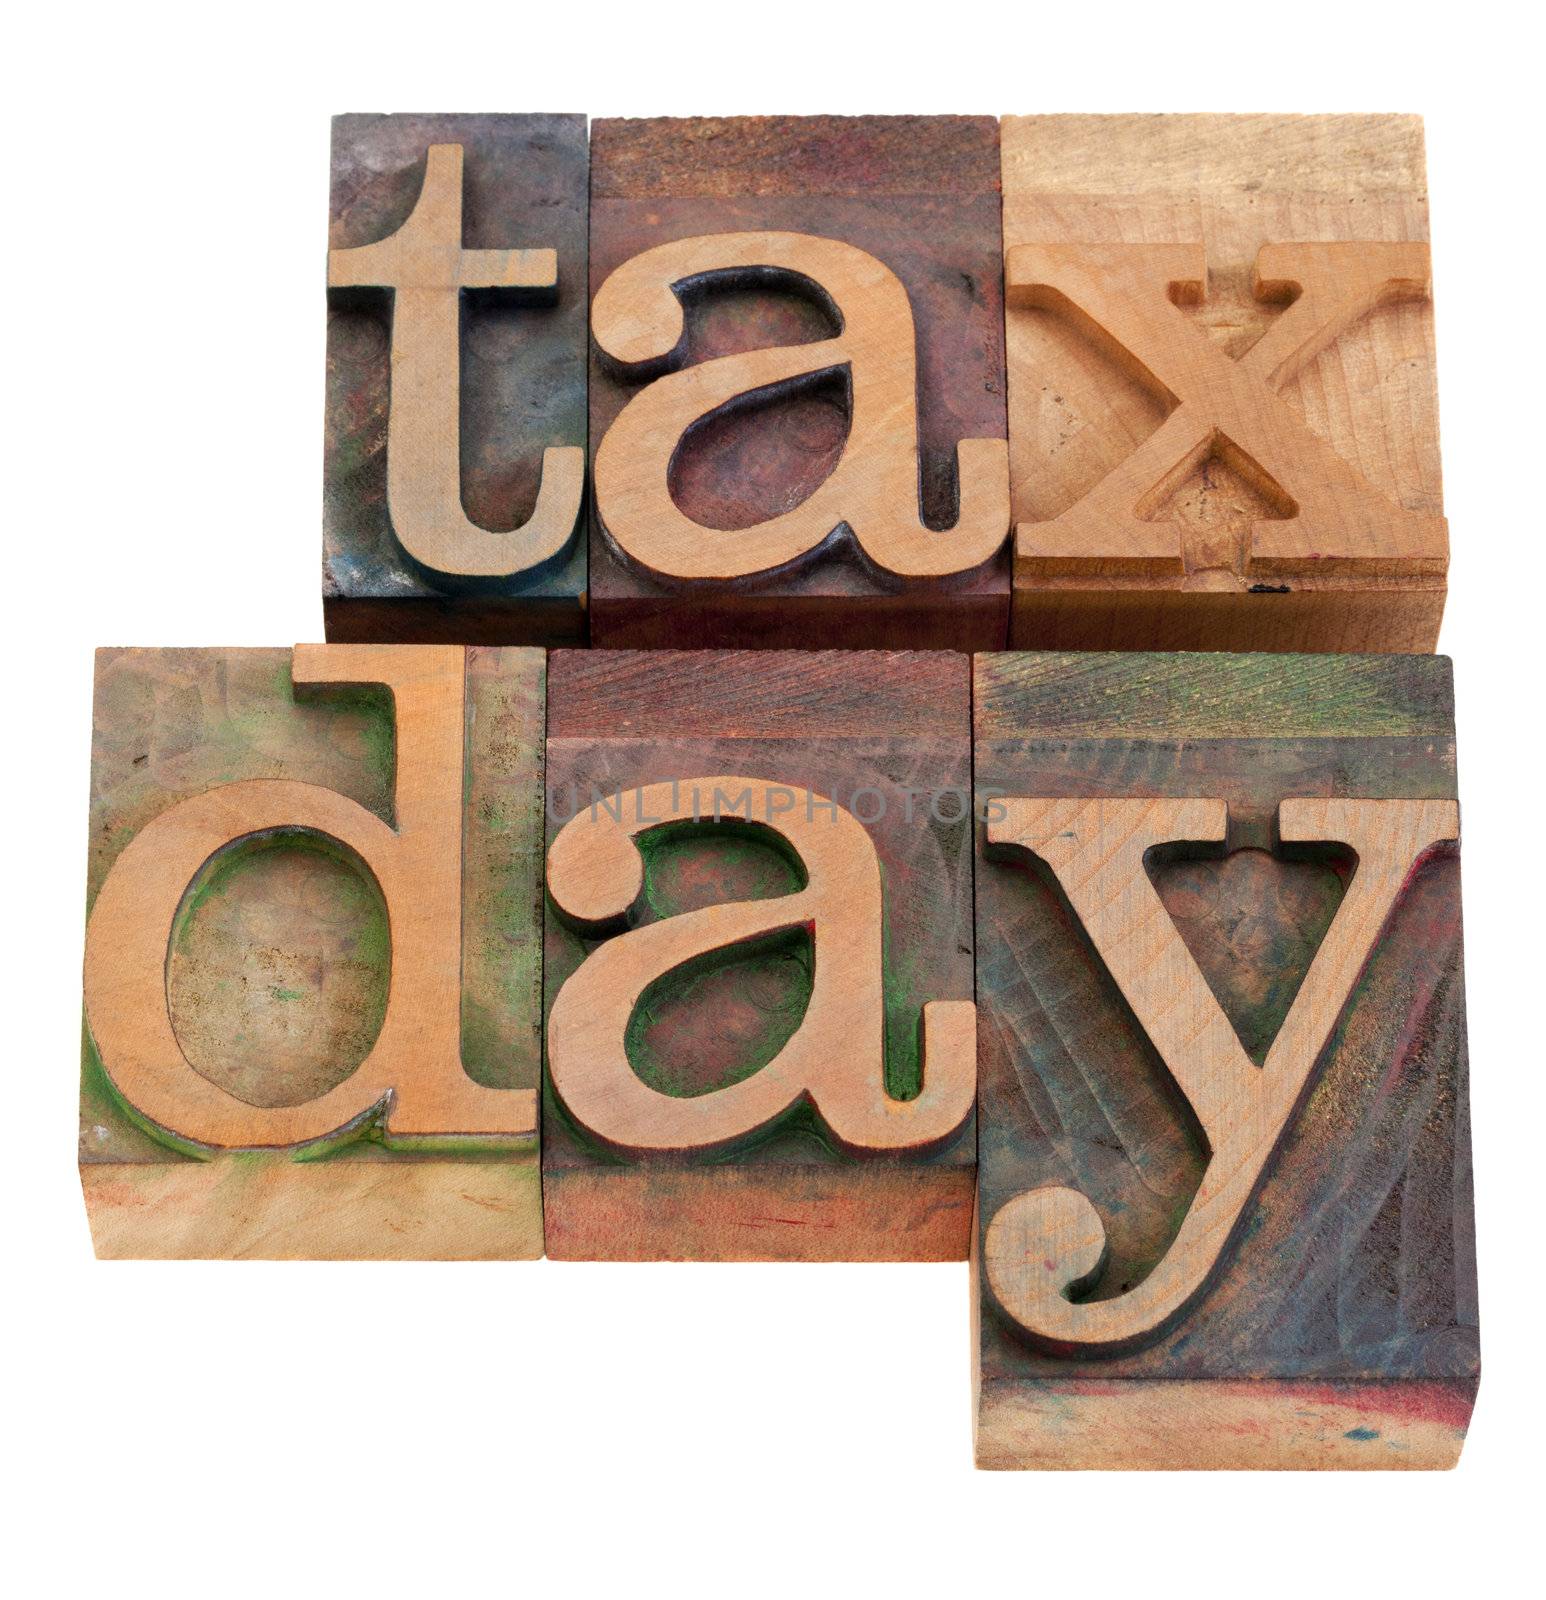 tax day - words in vintage wooden letterpress printing blocks, stained by color inks, isolated on white